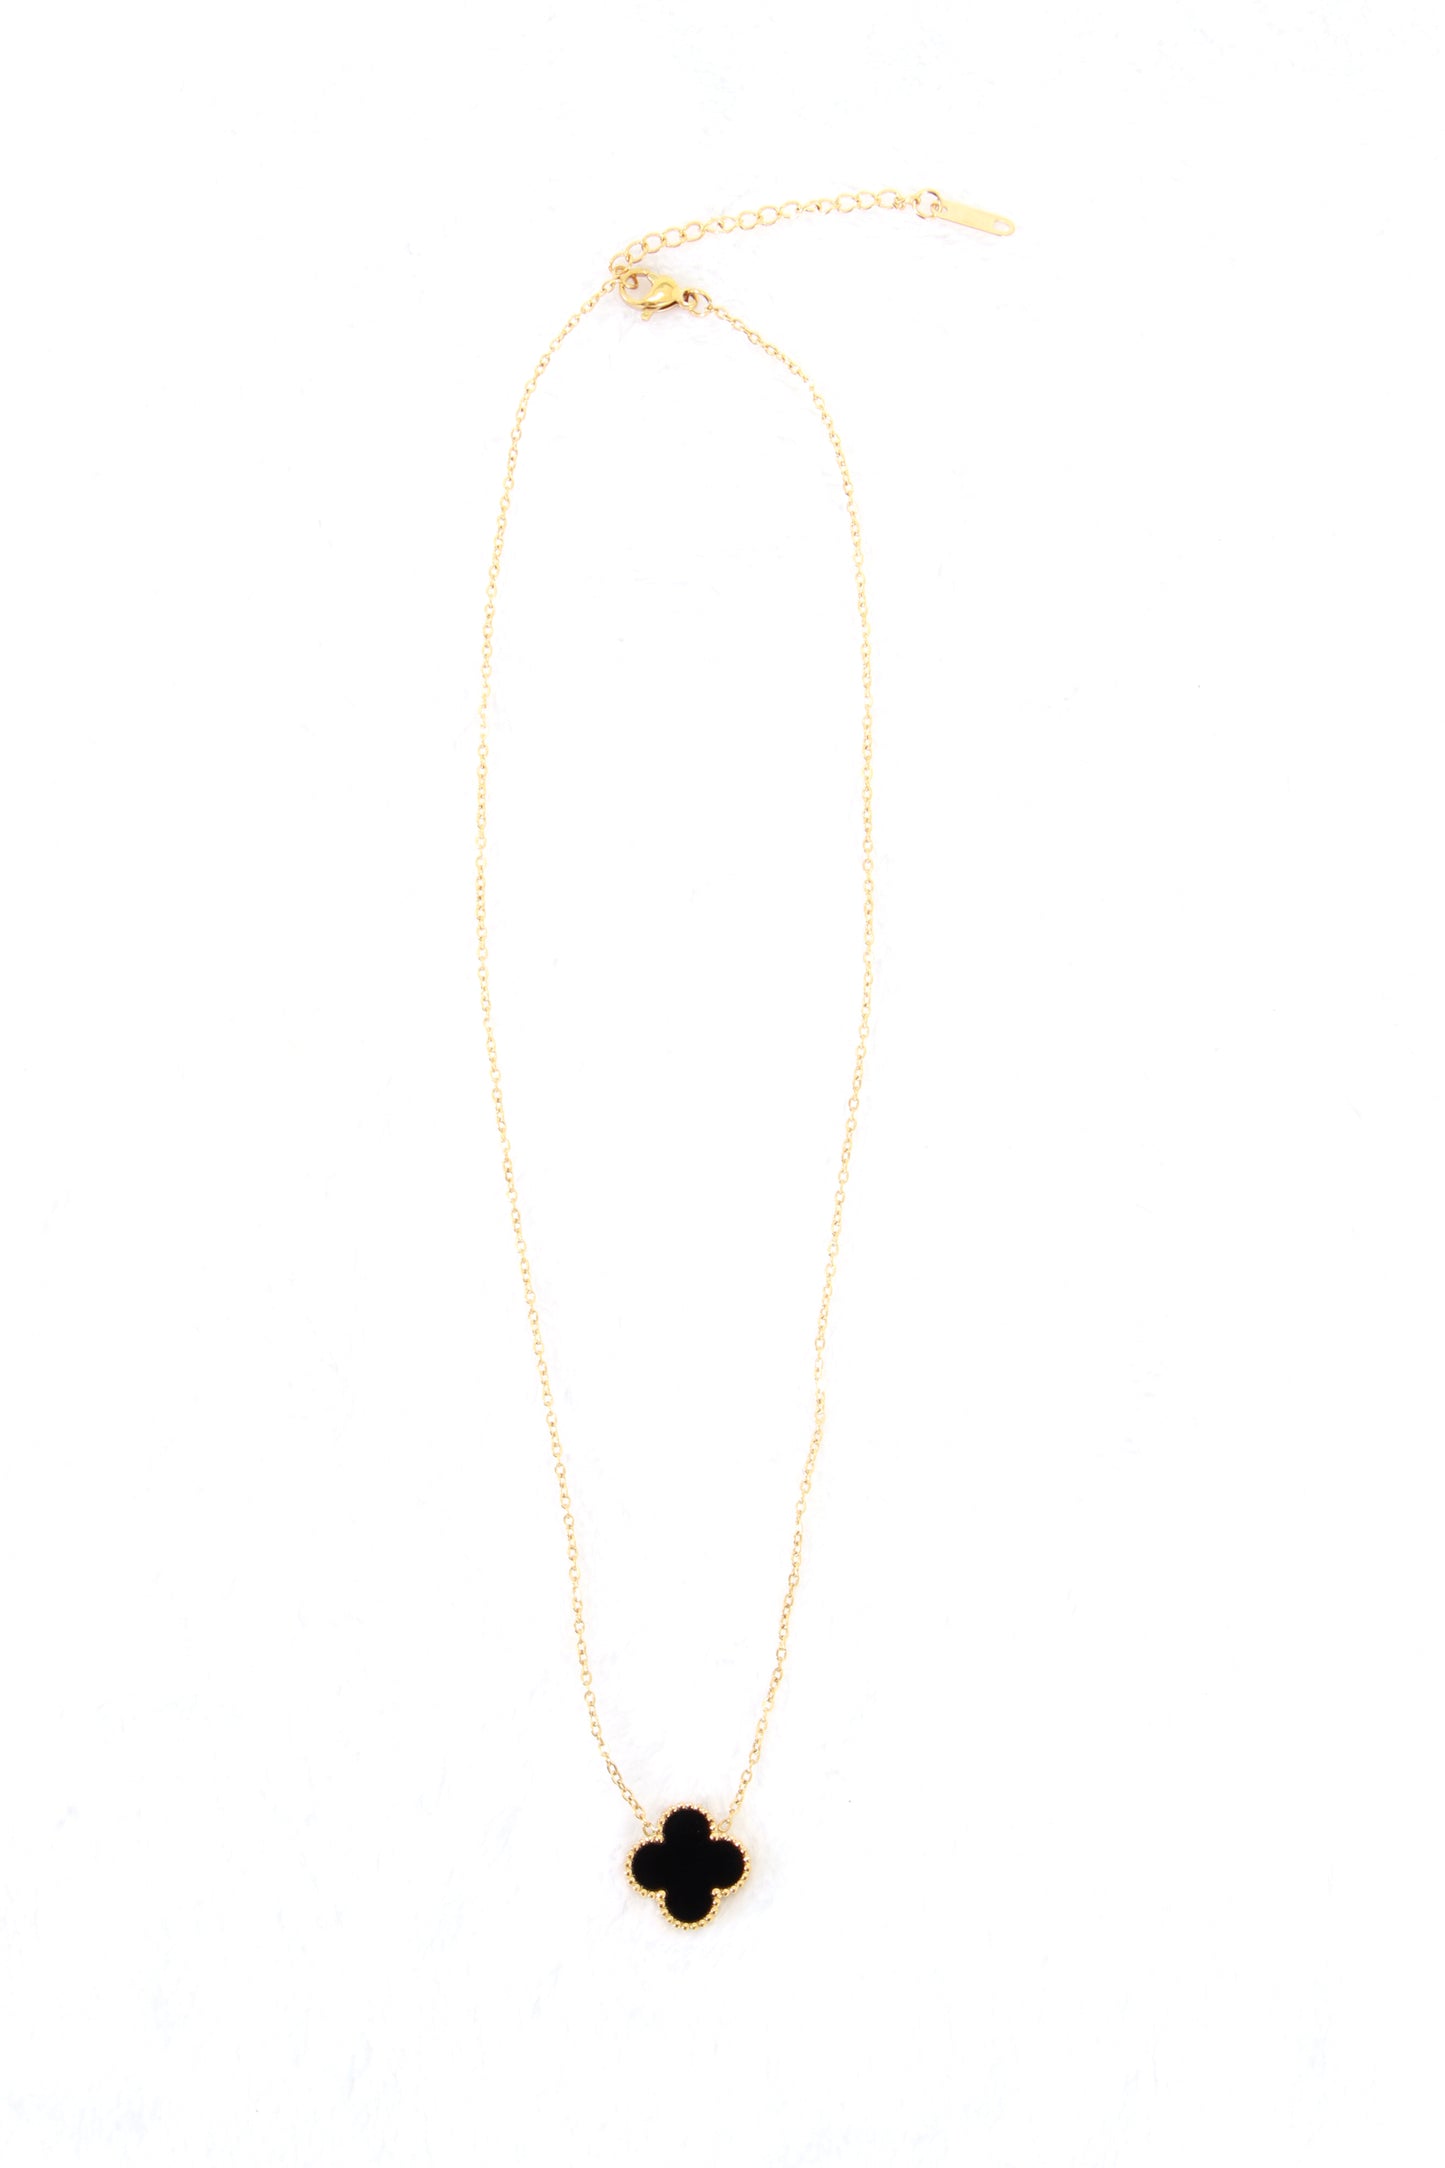 Lucky Clover Necklace, 18K Gold Plated - VCA Inspired Design